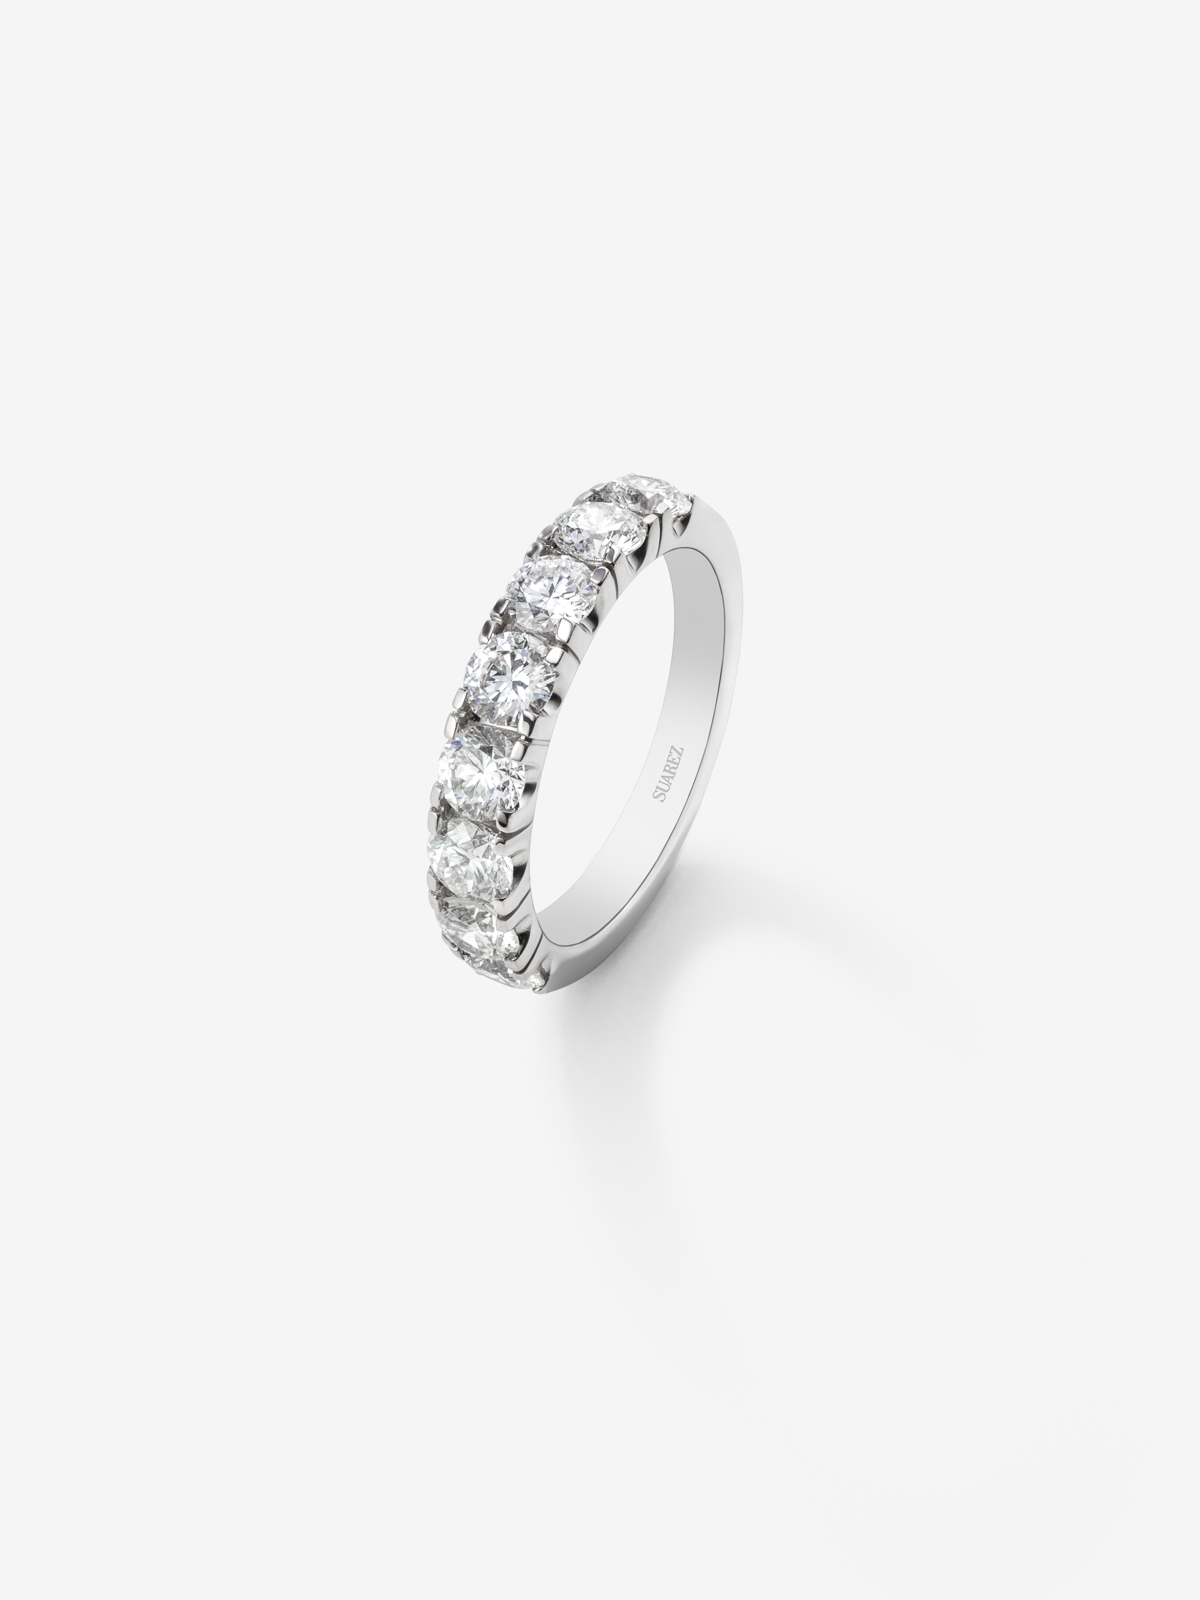 18K white gold half-eternity engagement ring with claw-set diamonds.